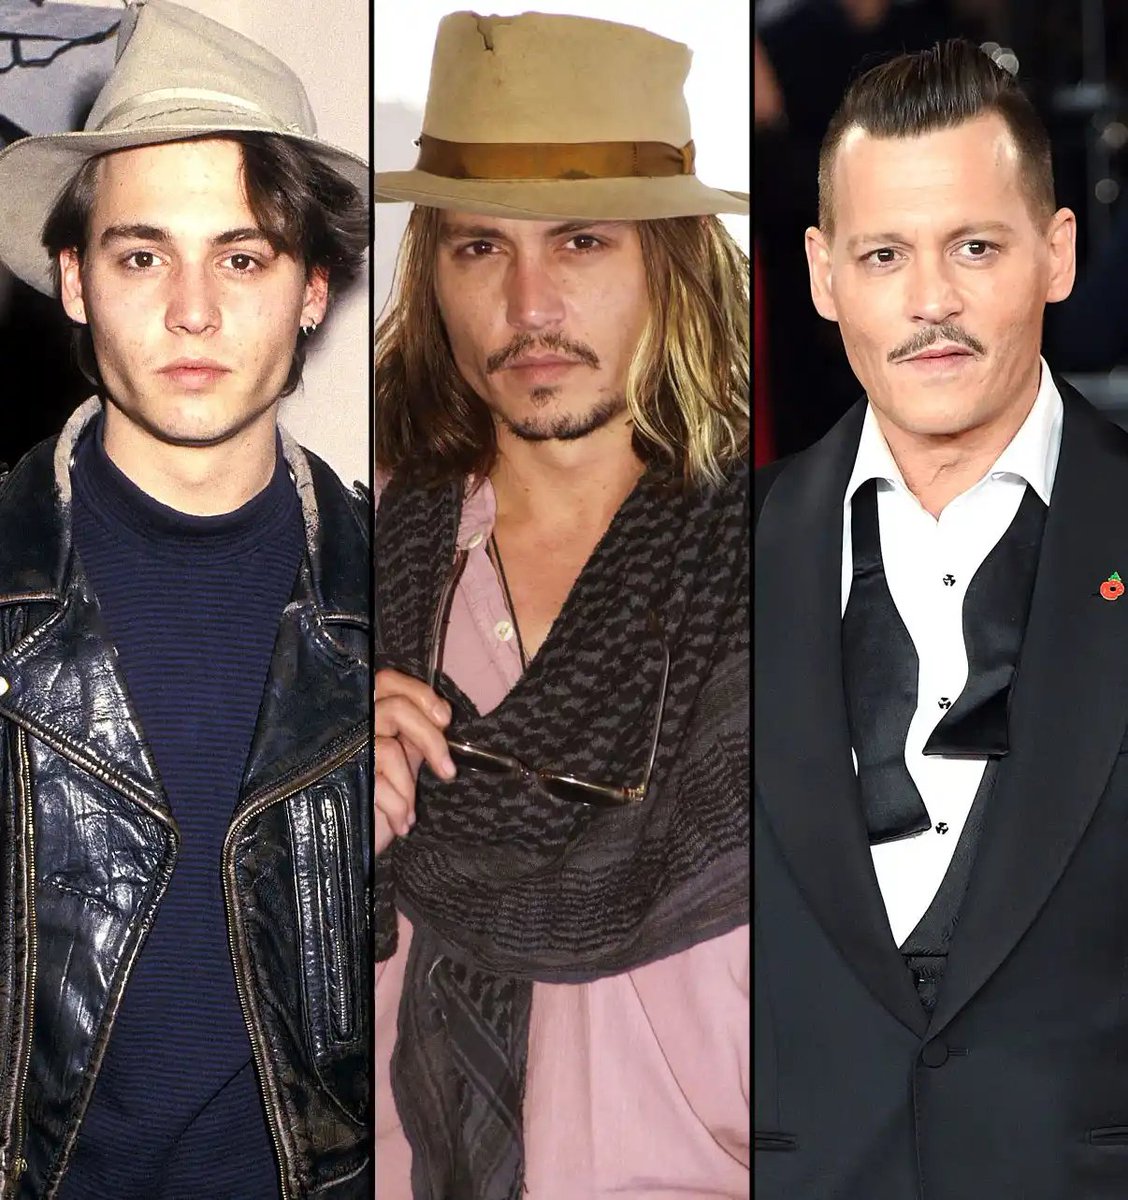 I believe Johnny Depp was a good person at one point in his shitty life, however, 30+ years of substance & alcohol ab*se changed his personality, he already had a big temper, it made him become even more v*olent and evil. The change in his face reflects that personality change.